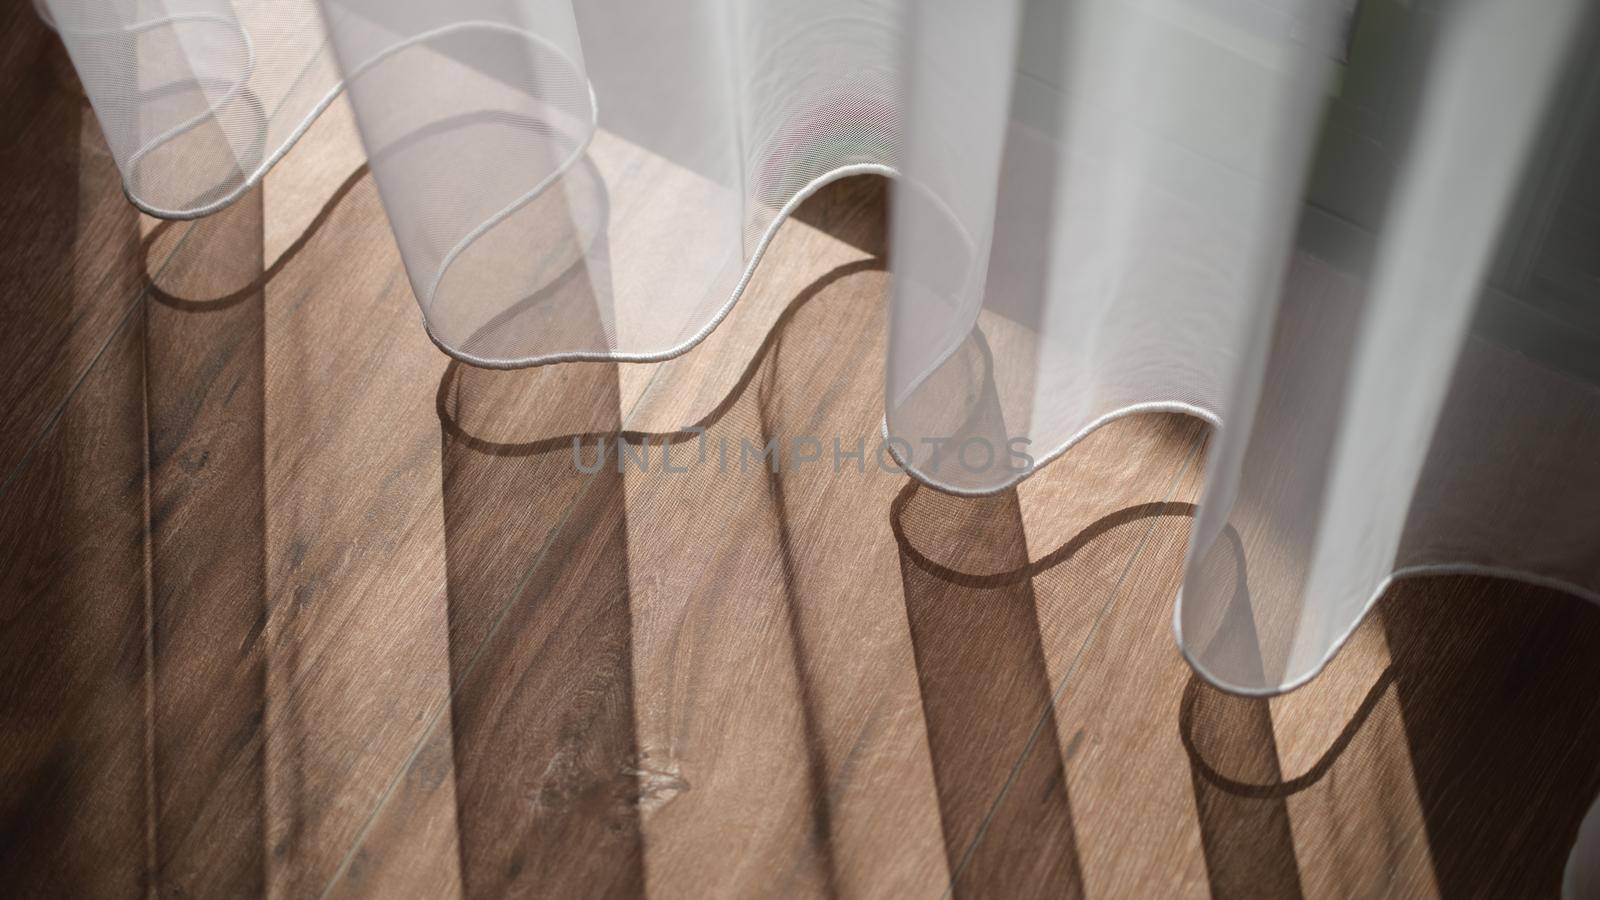 Sunlight falling on wooden floor and creating shadow from curtains background. Interior design sewing curtains concept